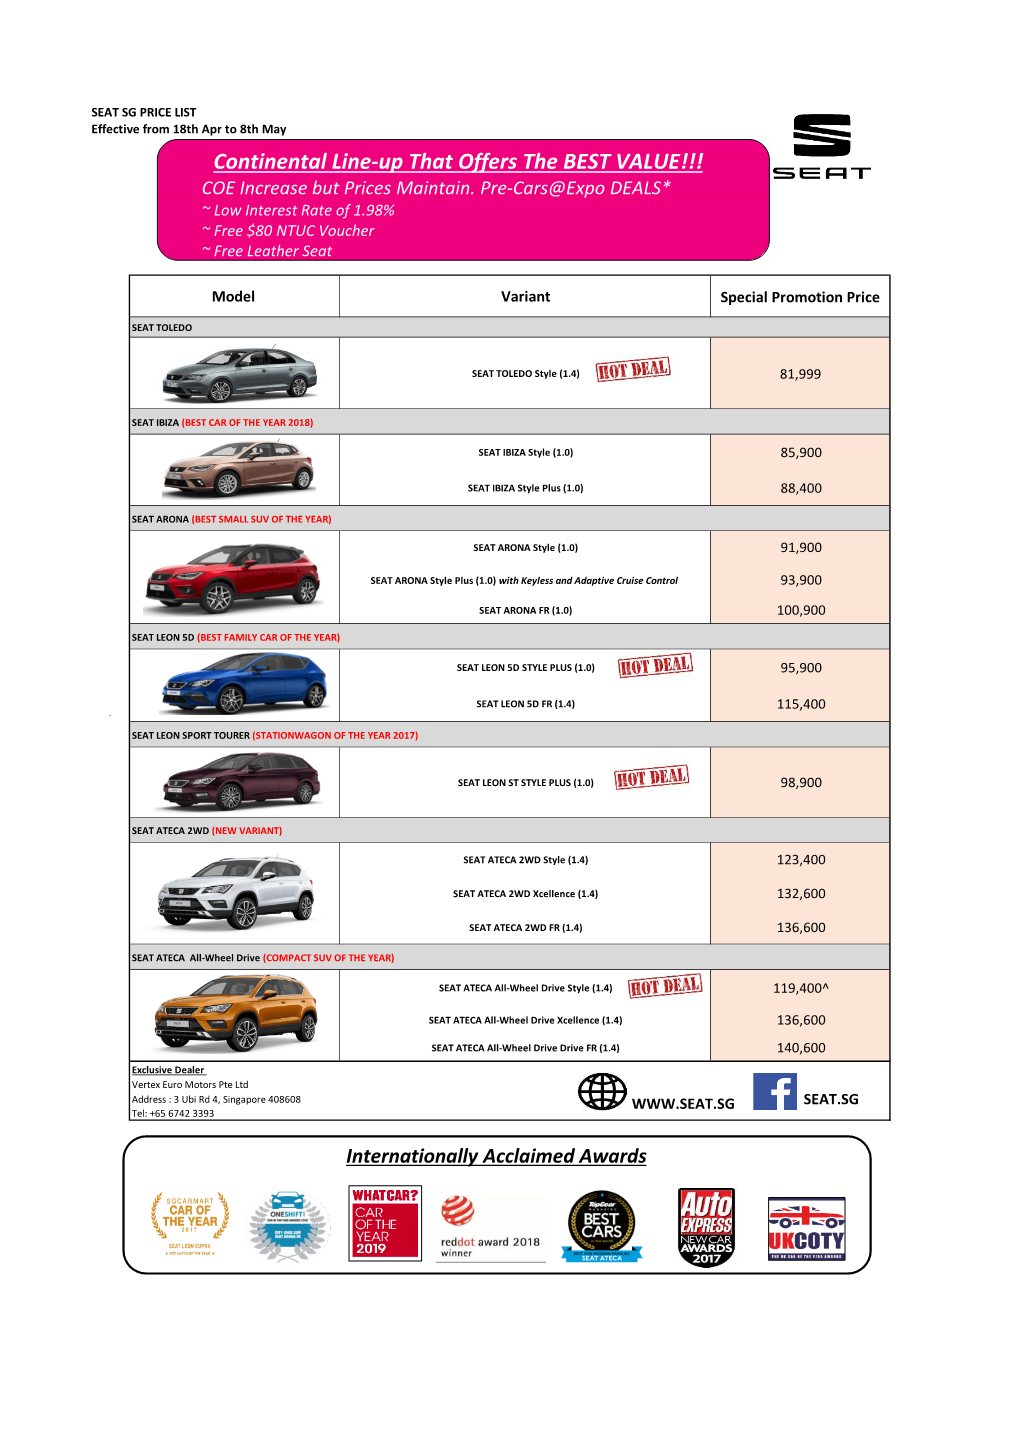 Continental Line-Up That Offers the BEST VALUE!!! COE Increase but Prices Maintain